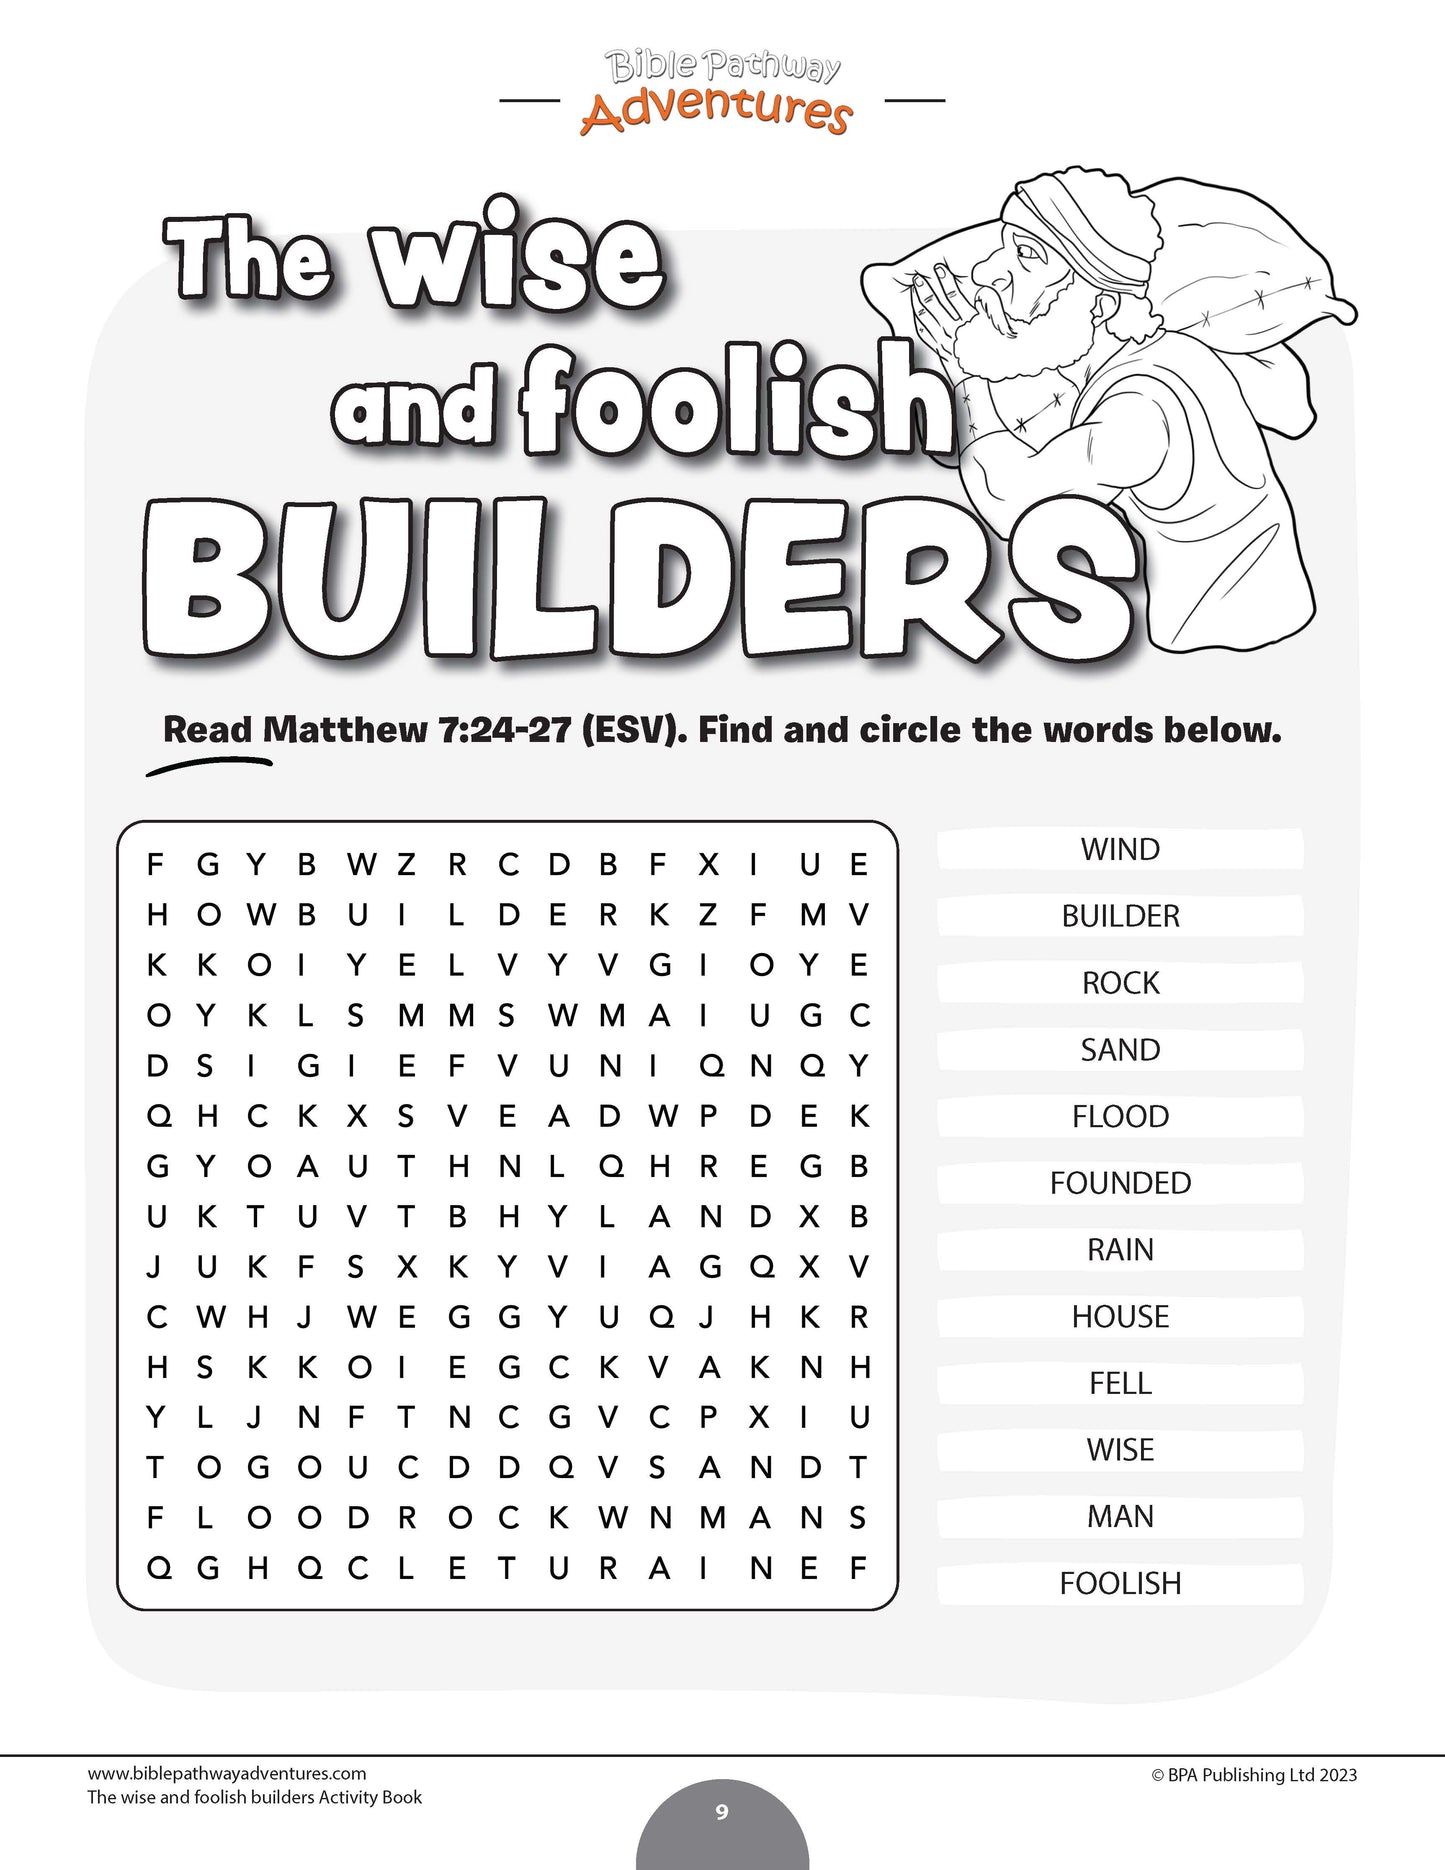 Parable of the Wise and Foolish Builders Activity Book (PDF)